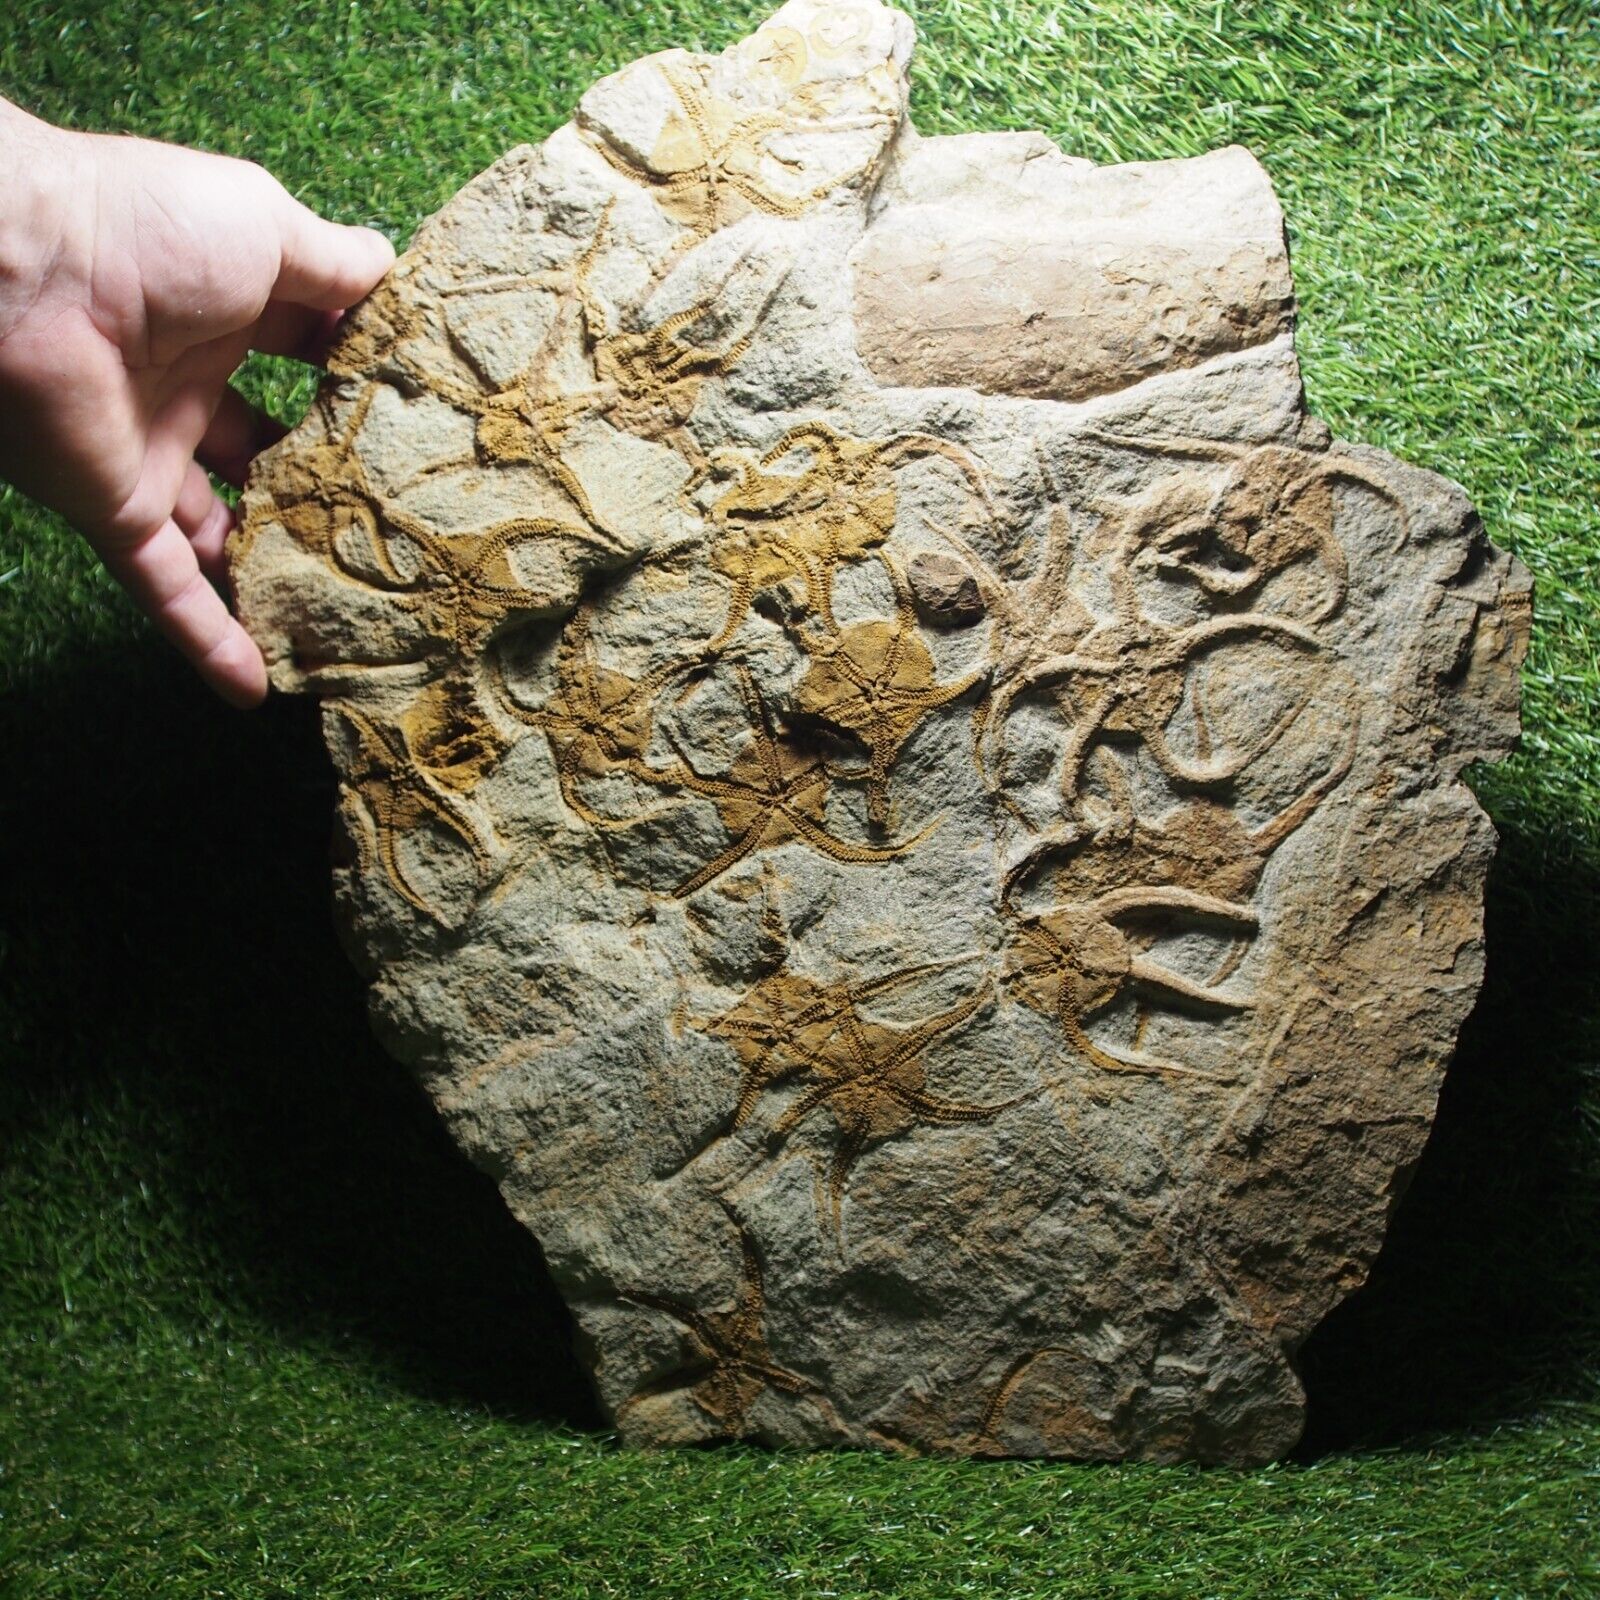 LARGE 6.9kg 44cm Starfish Ophiura sp. Fossil Morocco Ordovician